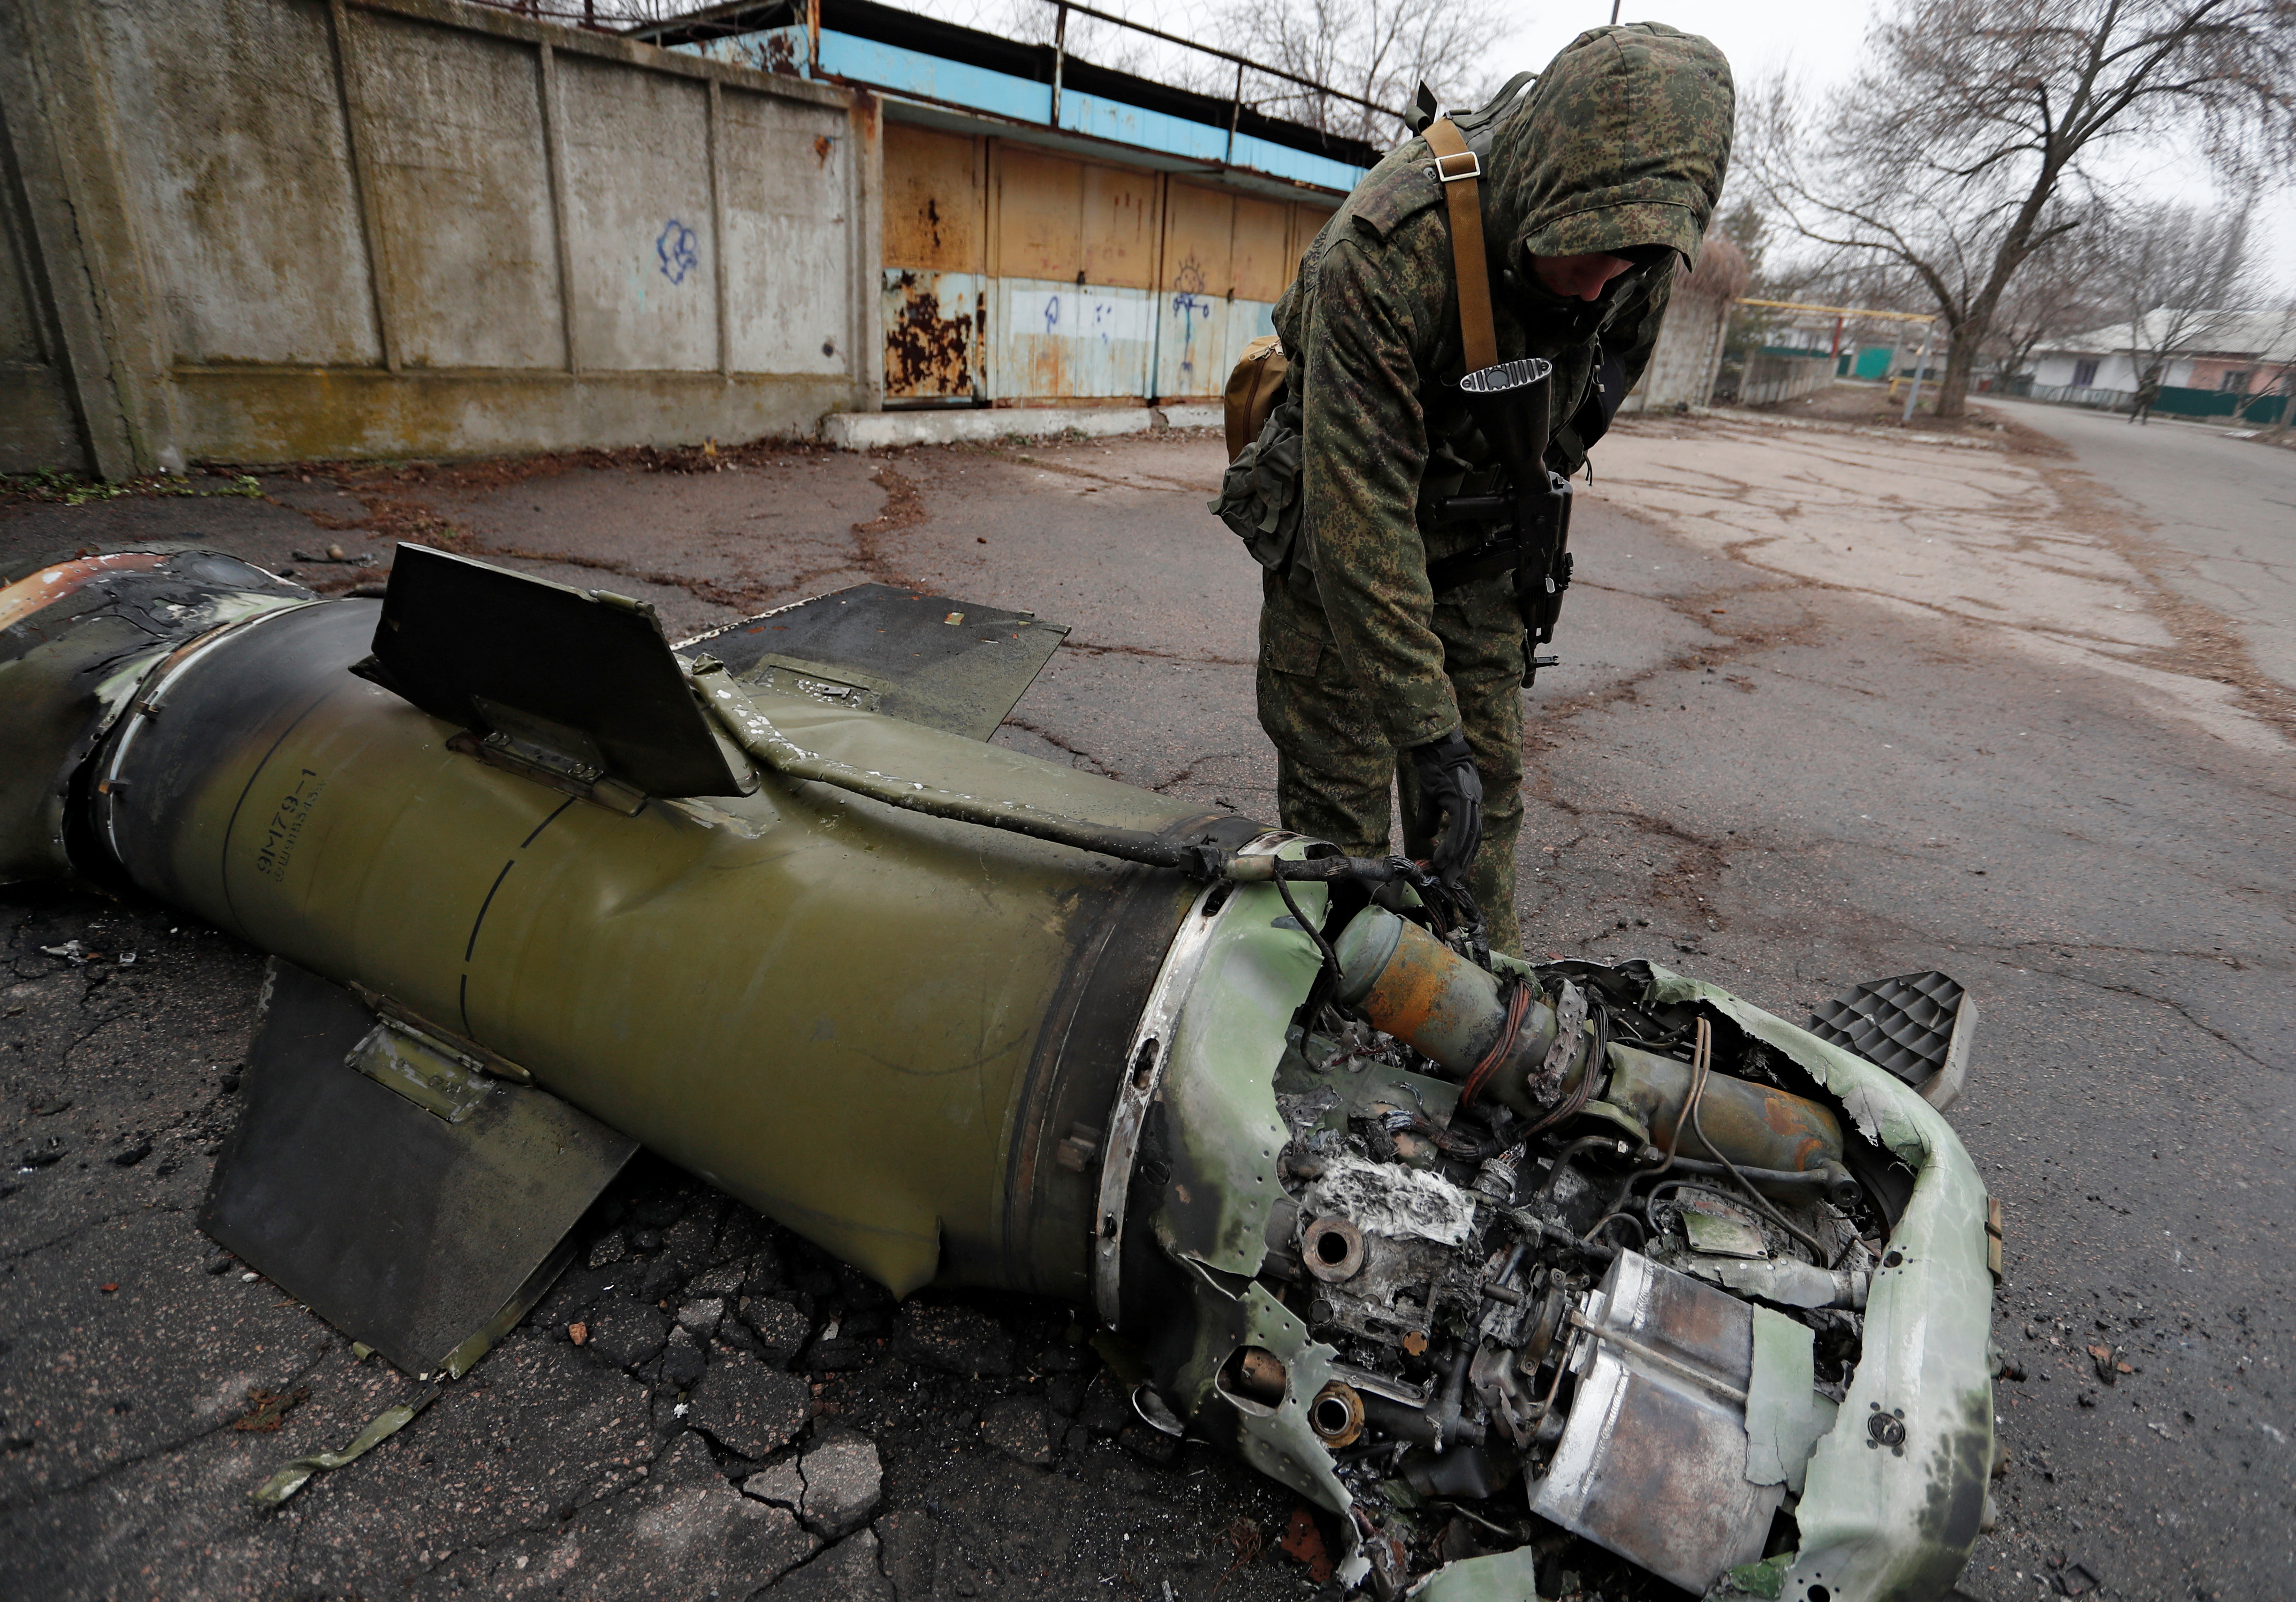 A militant of the self-proclaimed Donetsk People's Republic inspects the remains of a missile that landed on a street in Donetsk